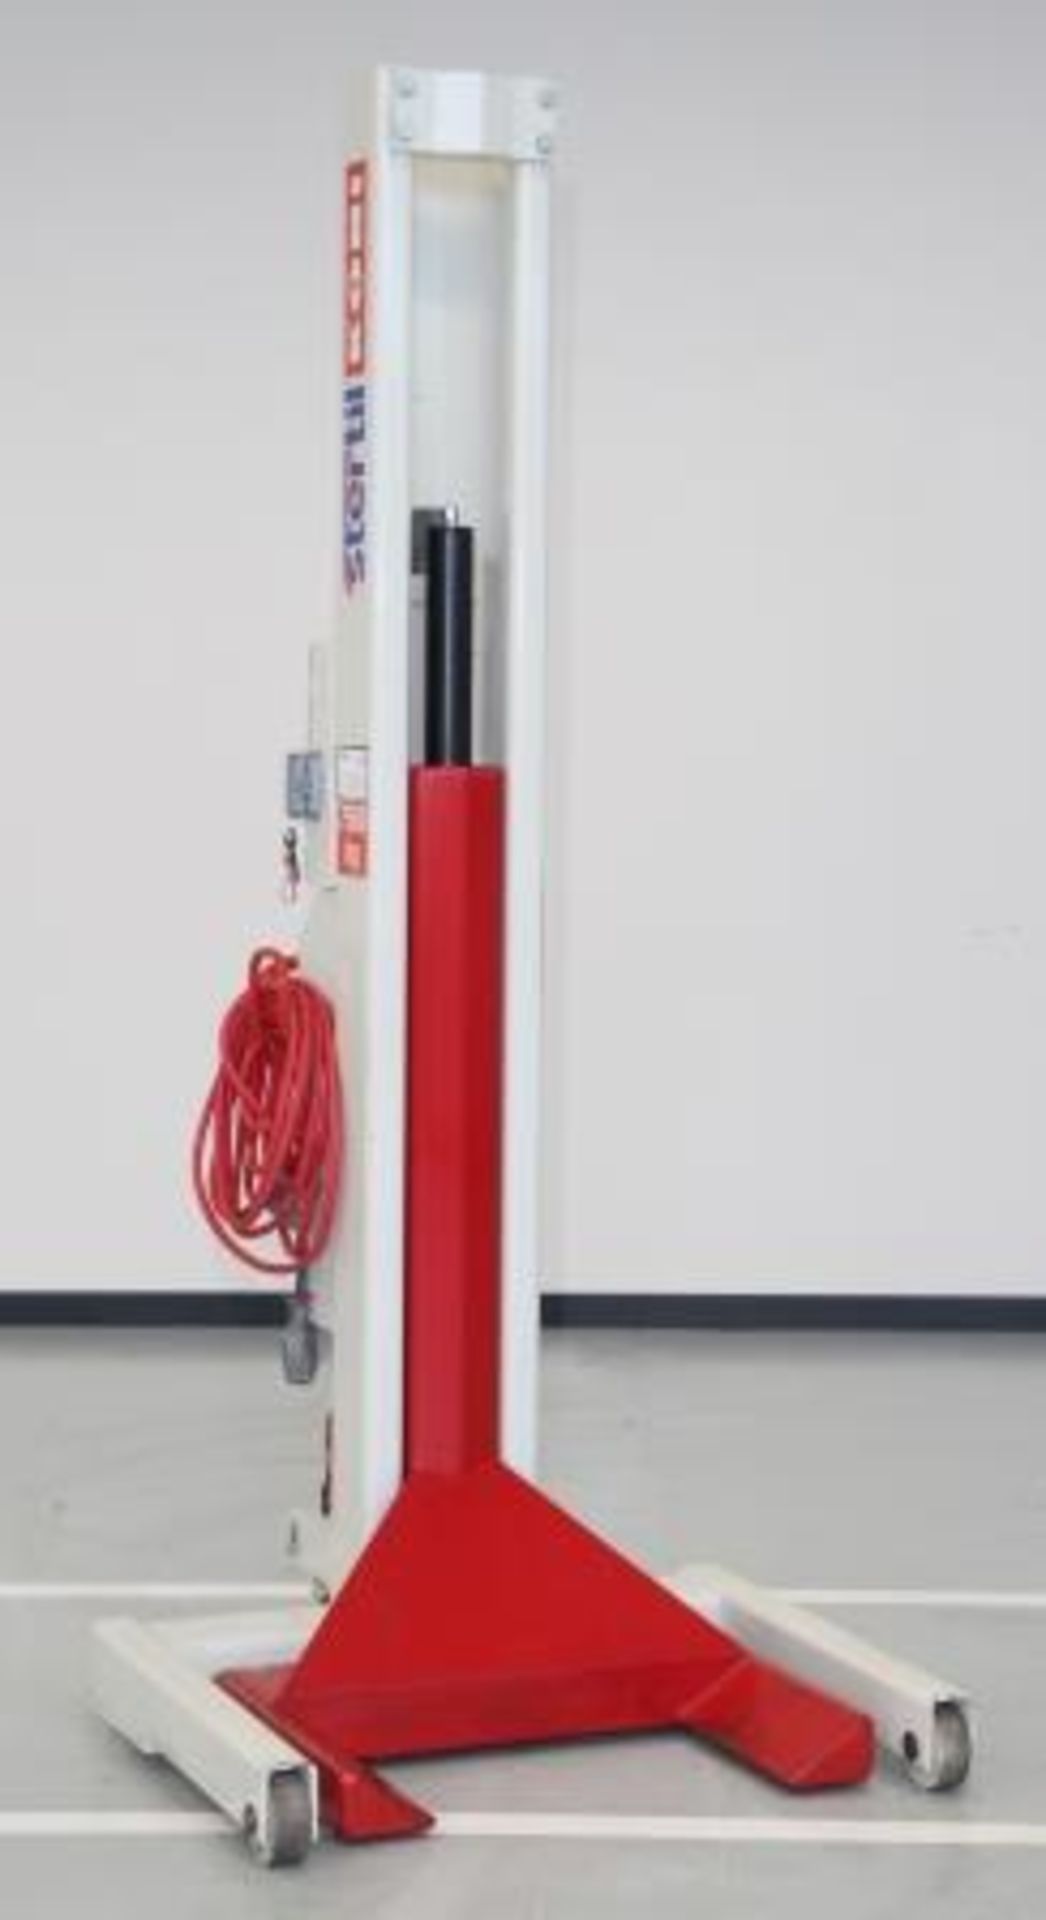 Stertil Koni Mobile Column Lifts (Cabled) - Image 5 of 23